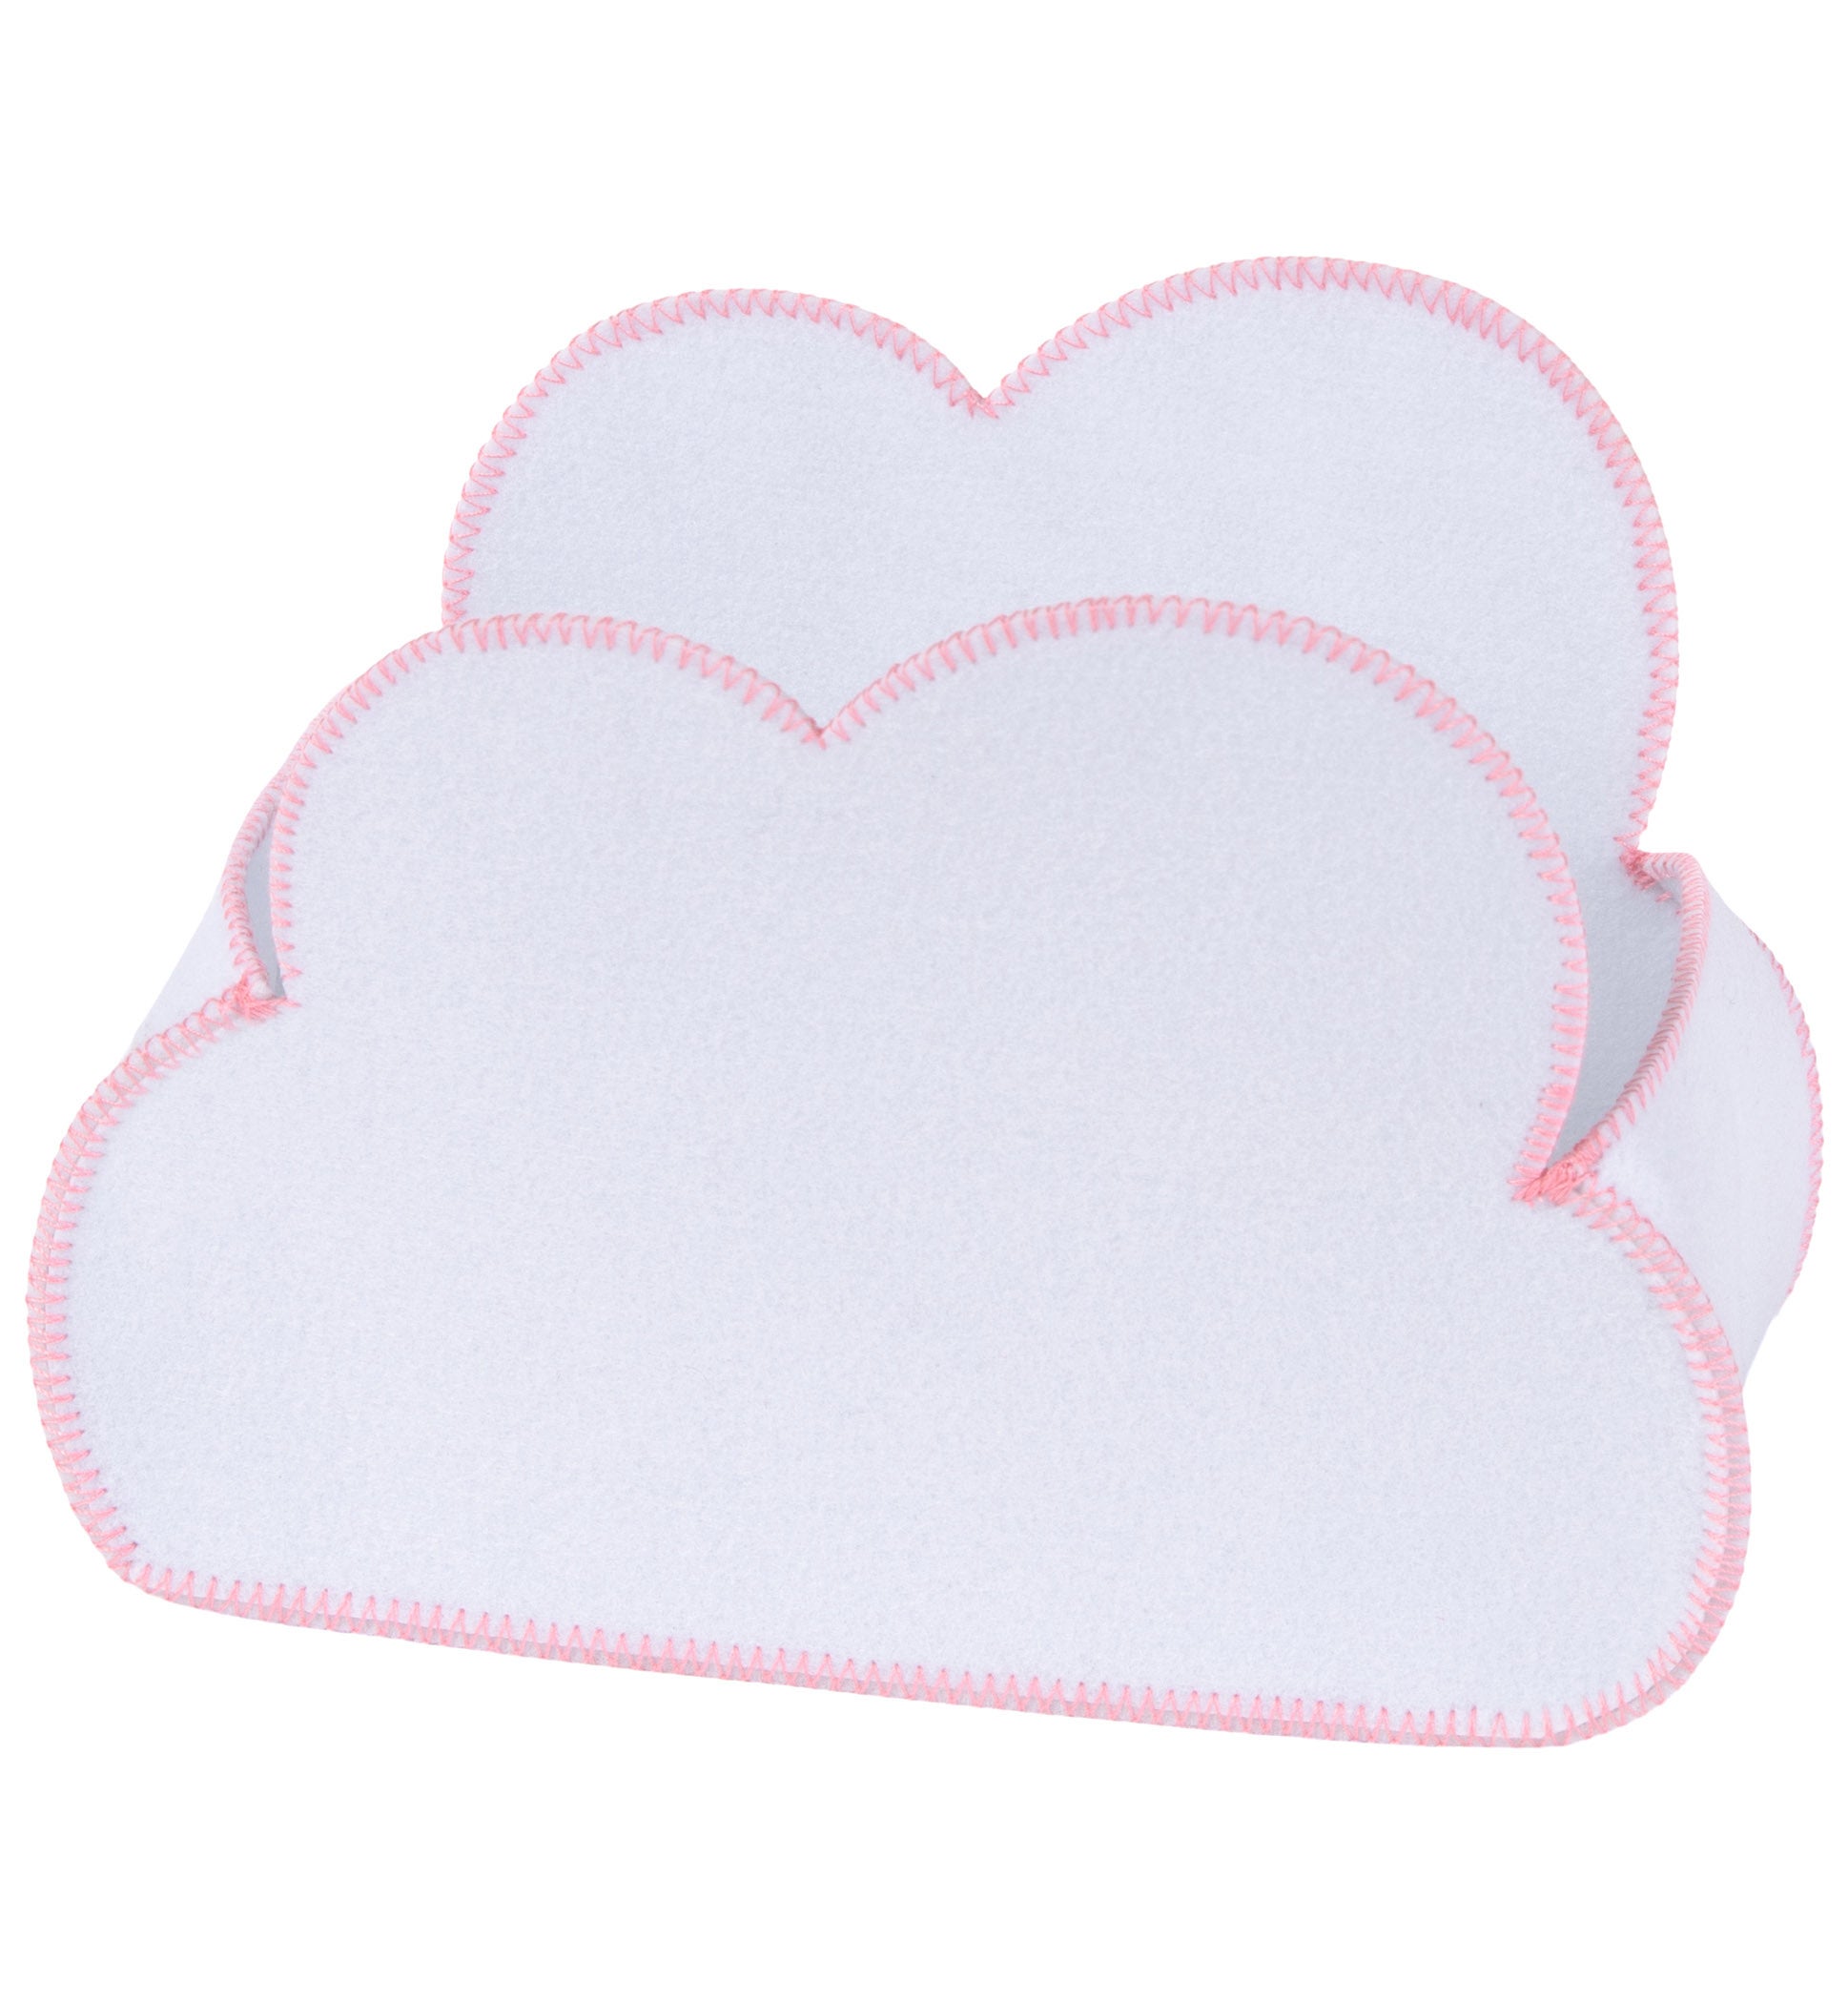 Welcome Baby Cloud Shaped 5 Piece Gift Set